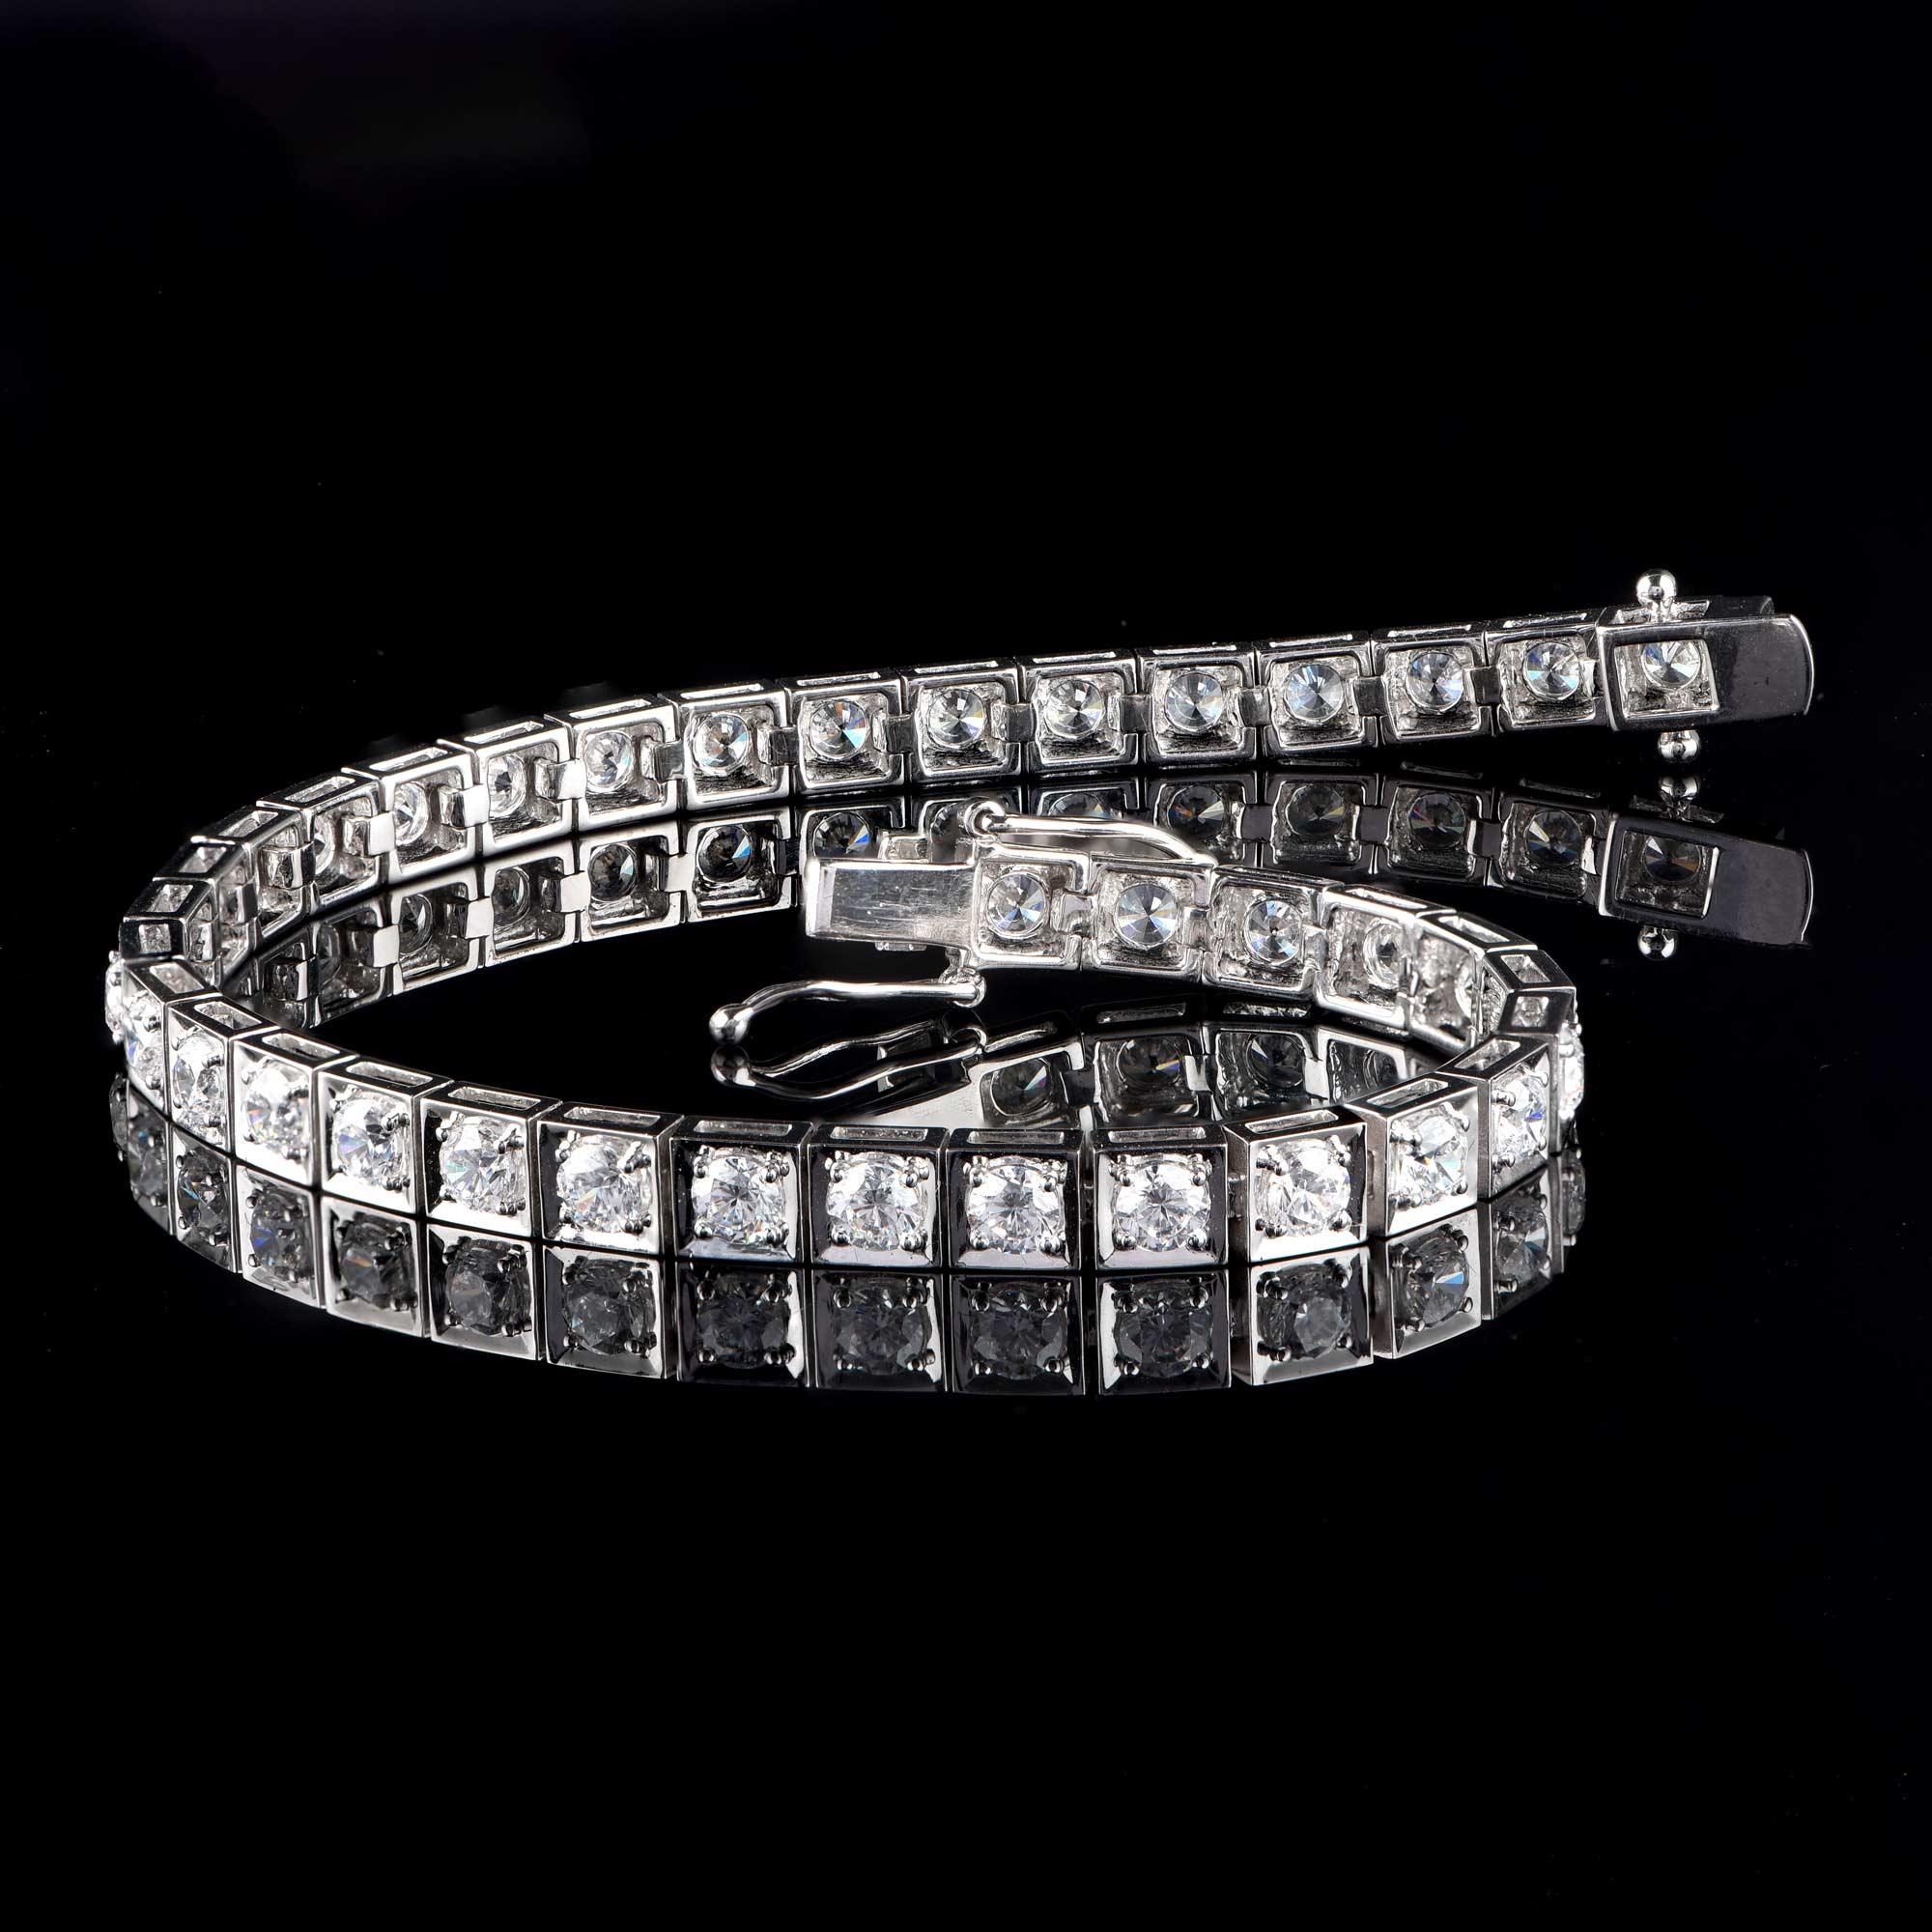 This designer bracelet shines brightly with 37 brilliant-cut diamond set in prong setting and elegantly designed in 18-karat white gold. The diamonds are graded H-I Color, I2 Clarity. 

This piece is made to order, please allow 2-3 weeks for